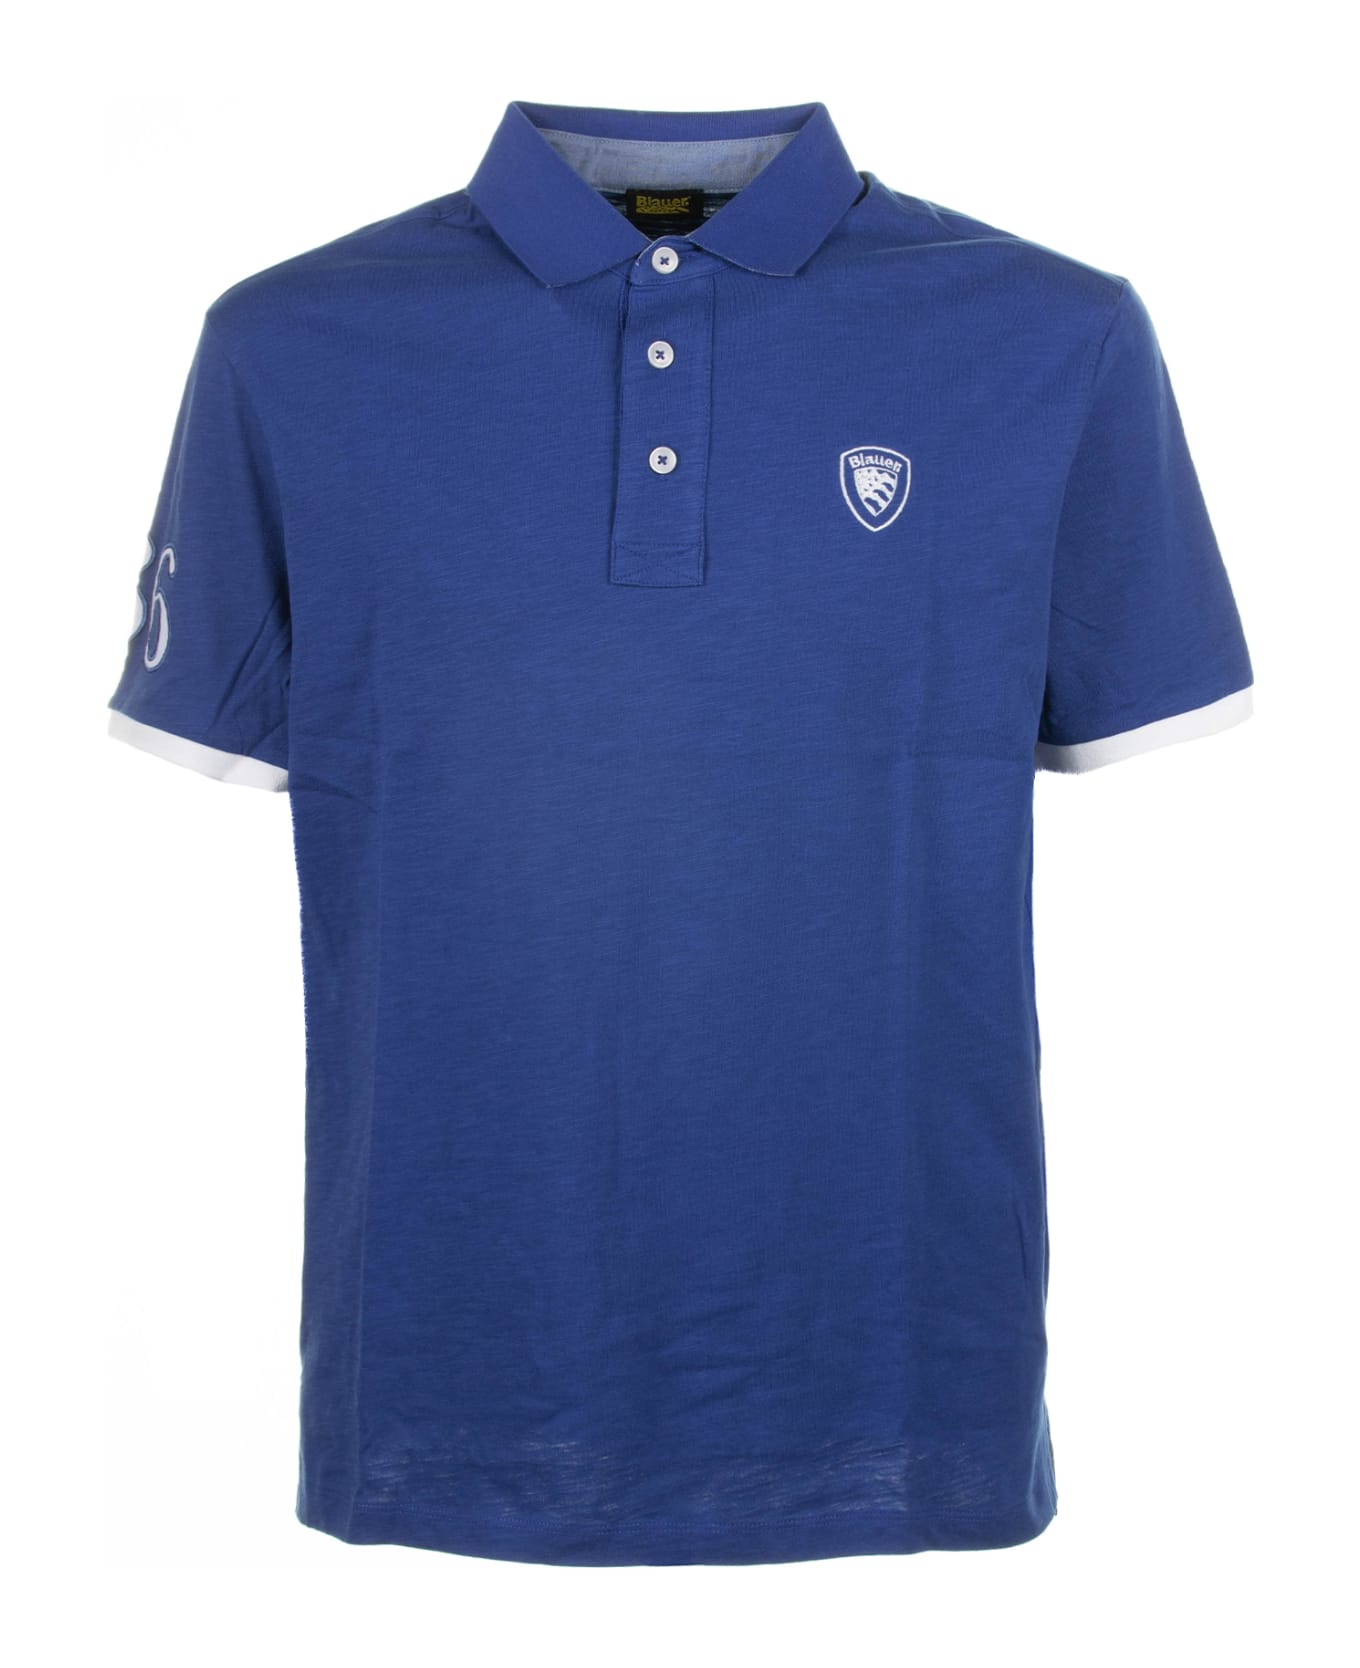 Blauer Polo 36 With Short Sleeves In Blue - MOLTO BLU